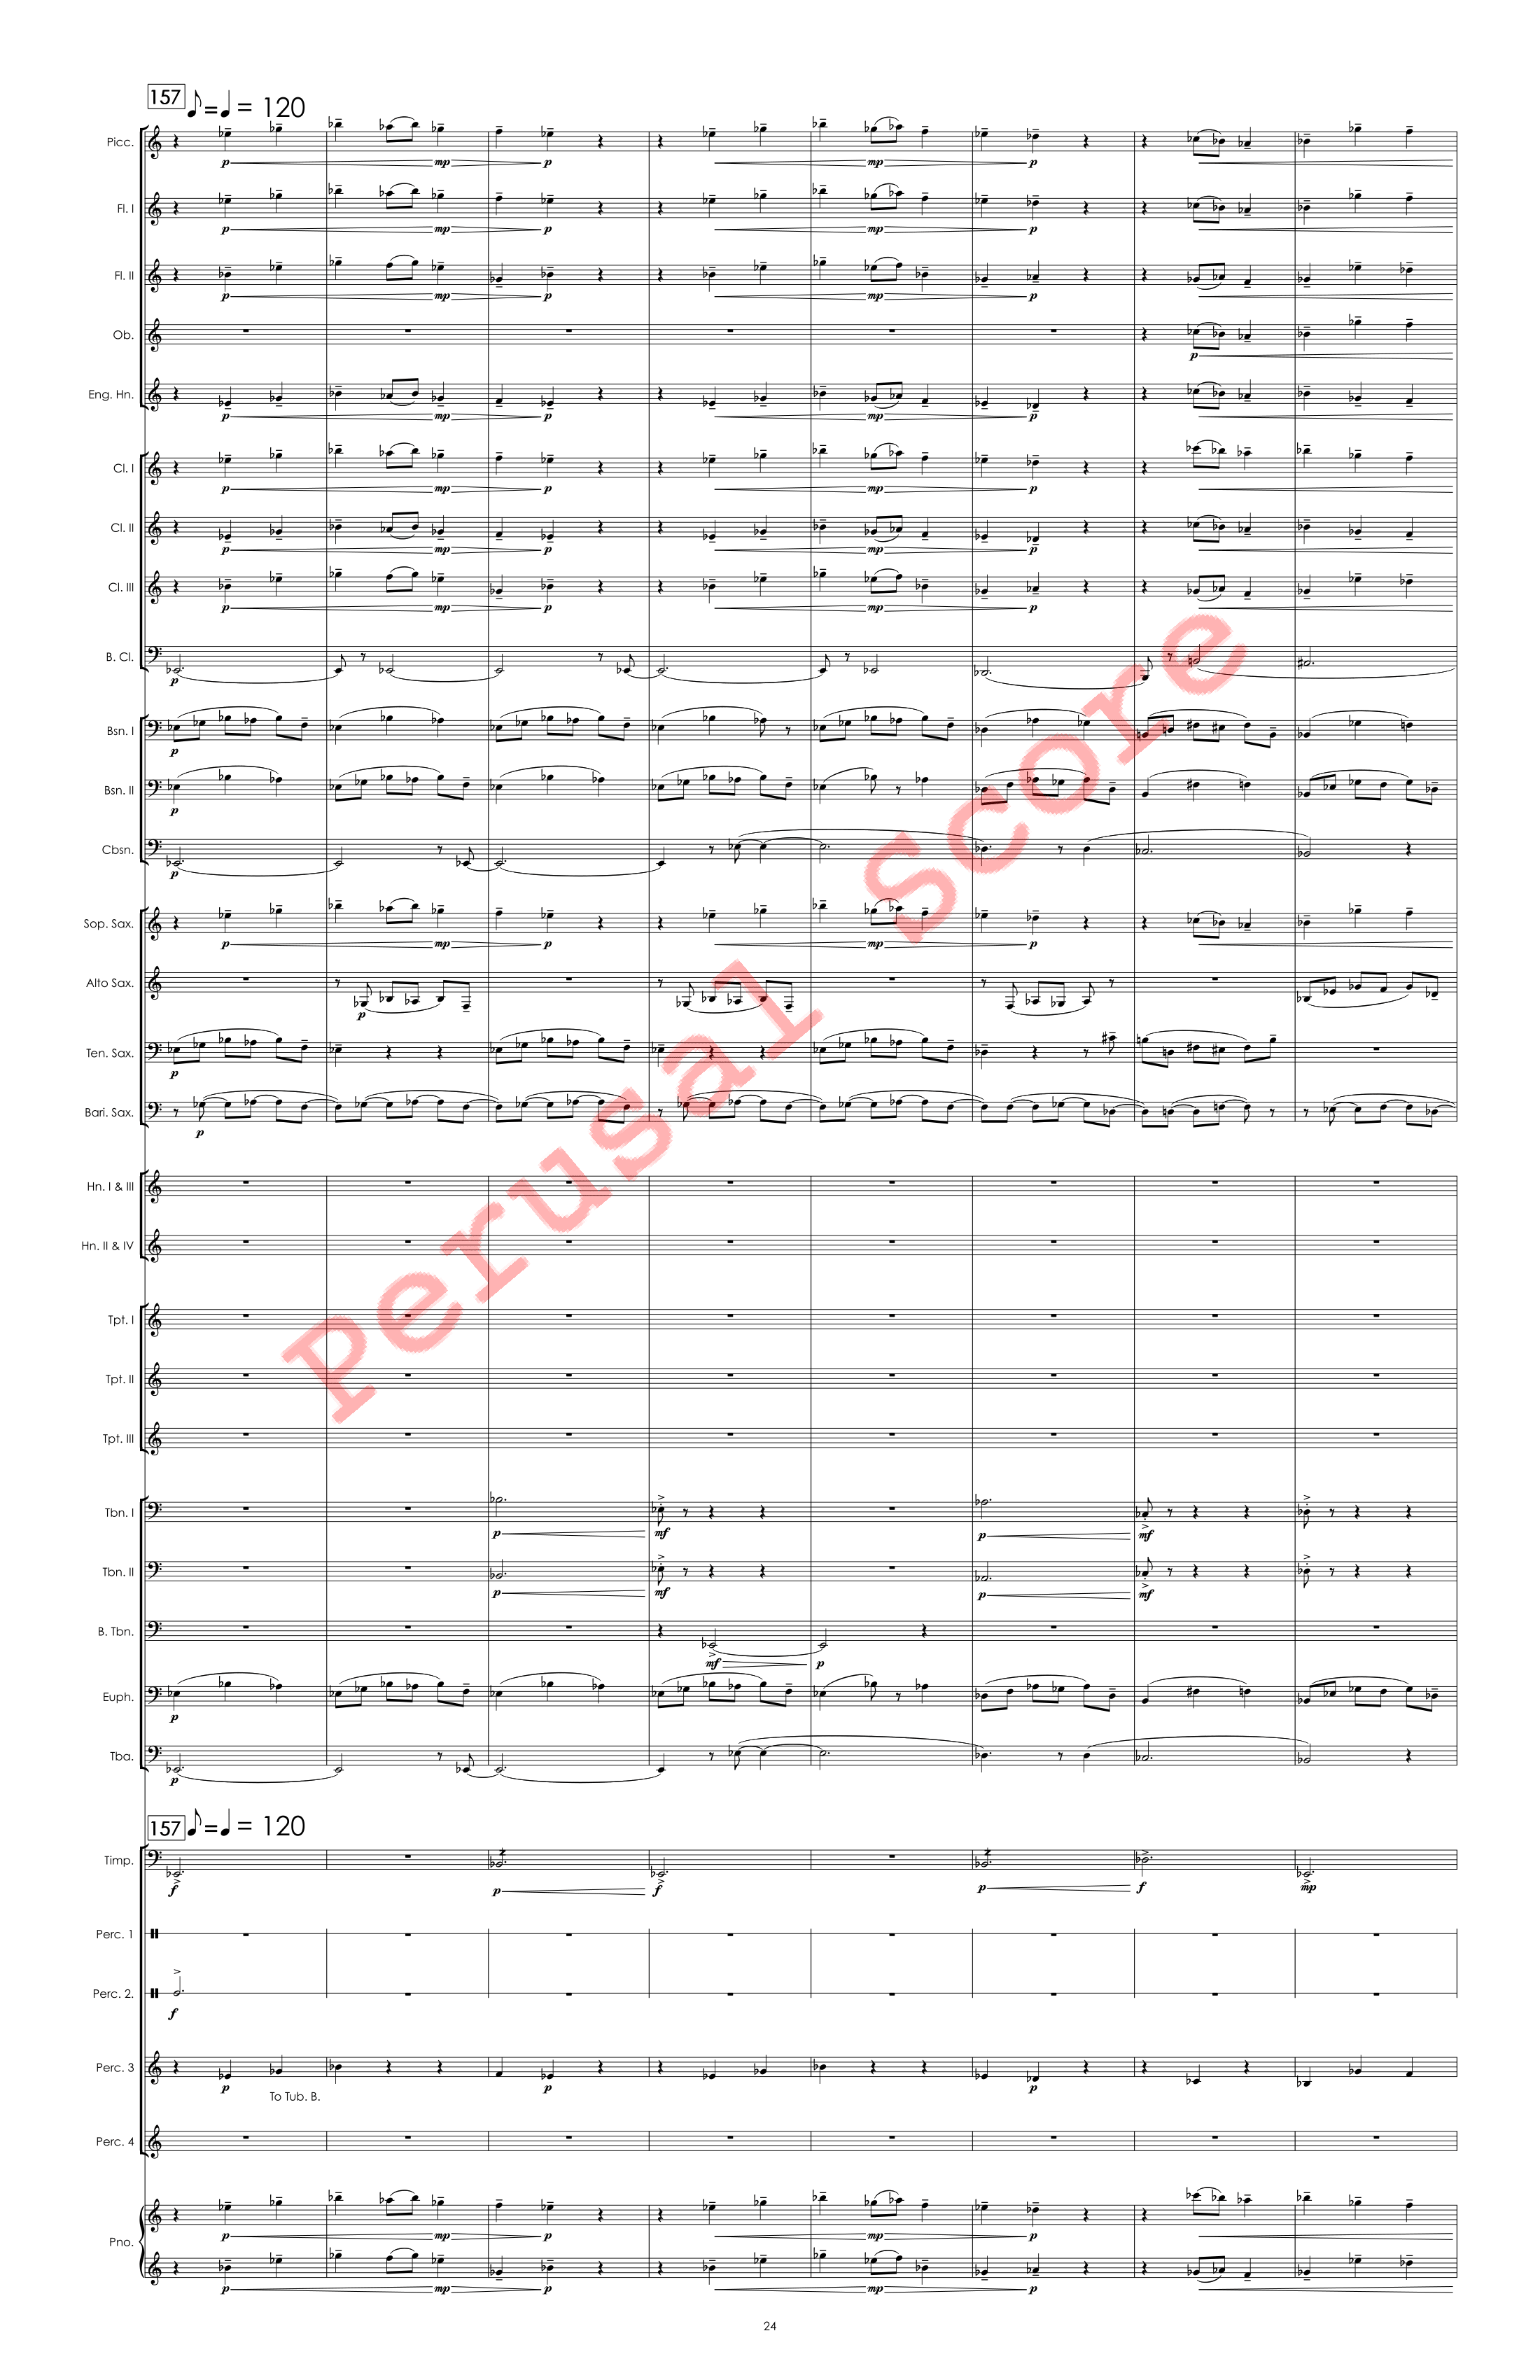 Canadian Folk Song - FINISHED 4.18.23- Full Score perusal score-24.png